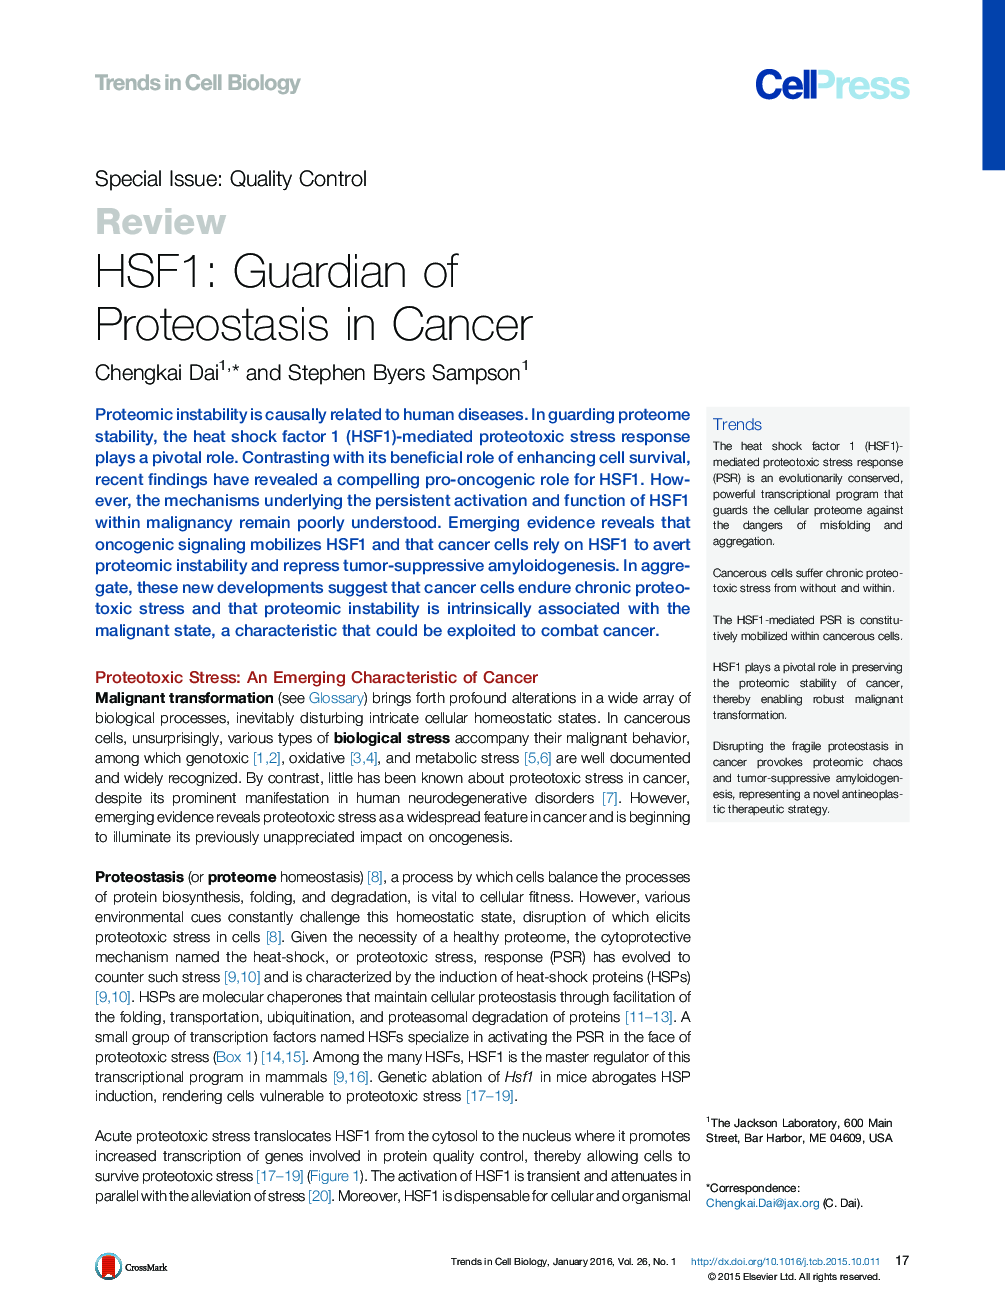 HSF1: Guardian of Proteostasis in Cancer